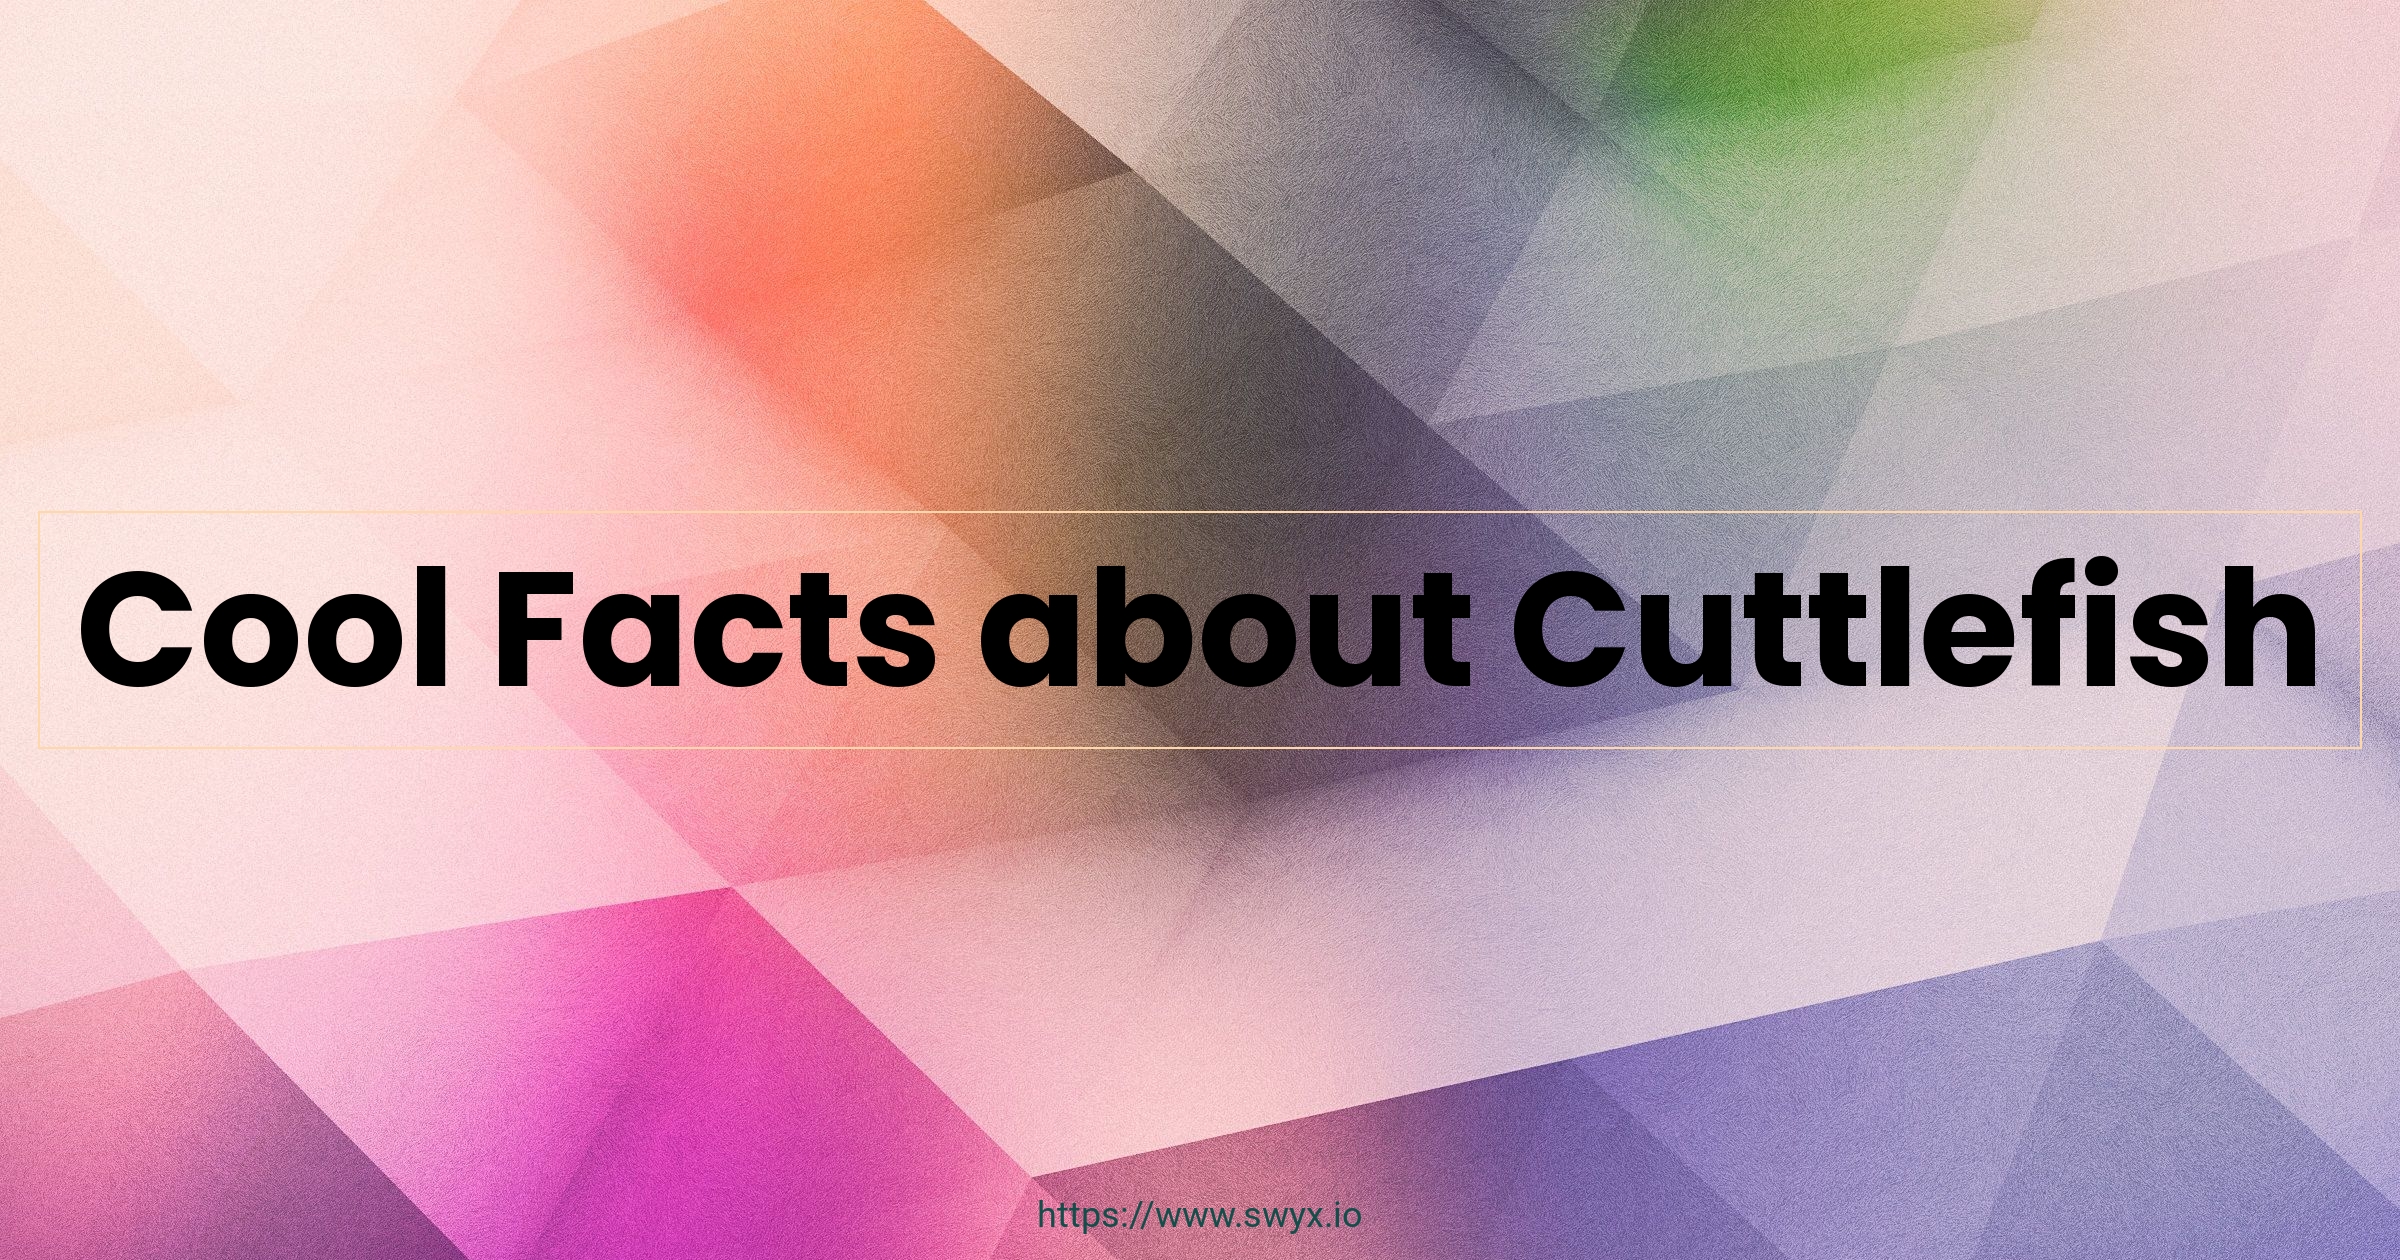 Cool Facts about Cuttlefish